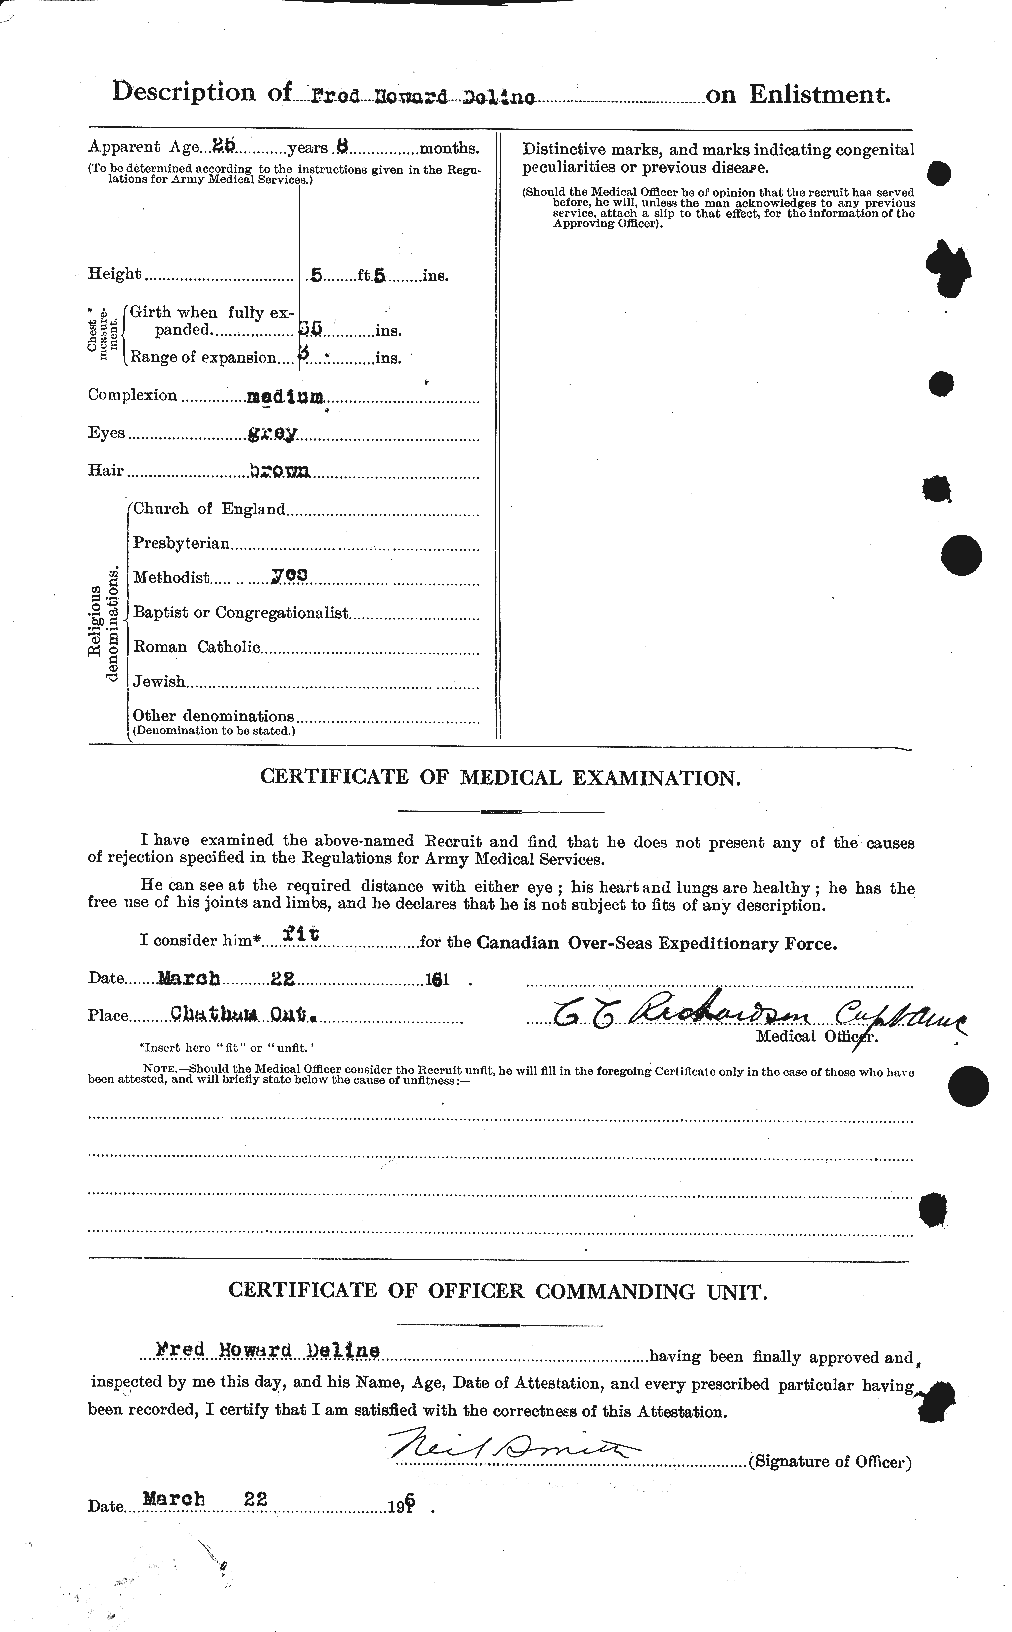 Personnel Records of the First World War - CEF 286563b